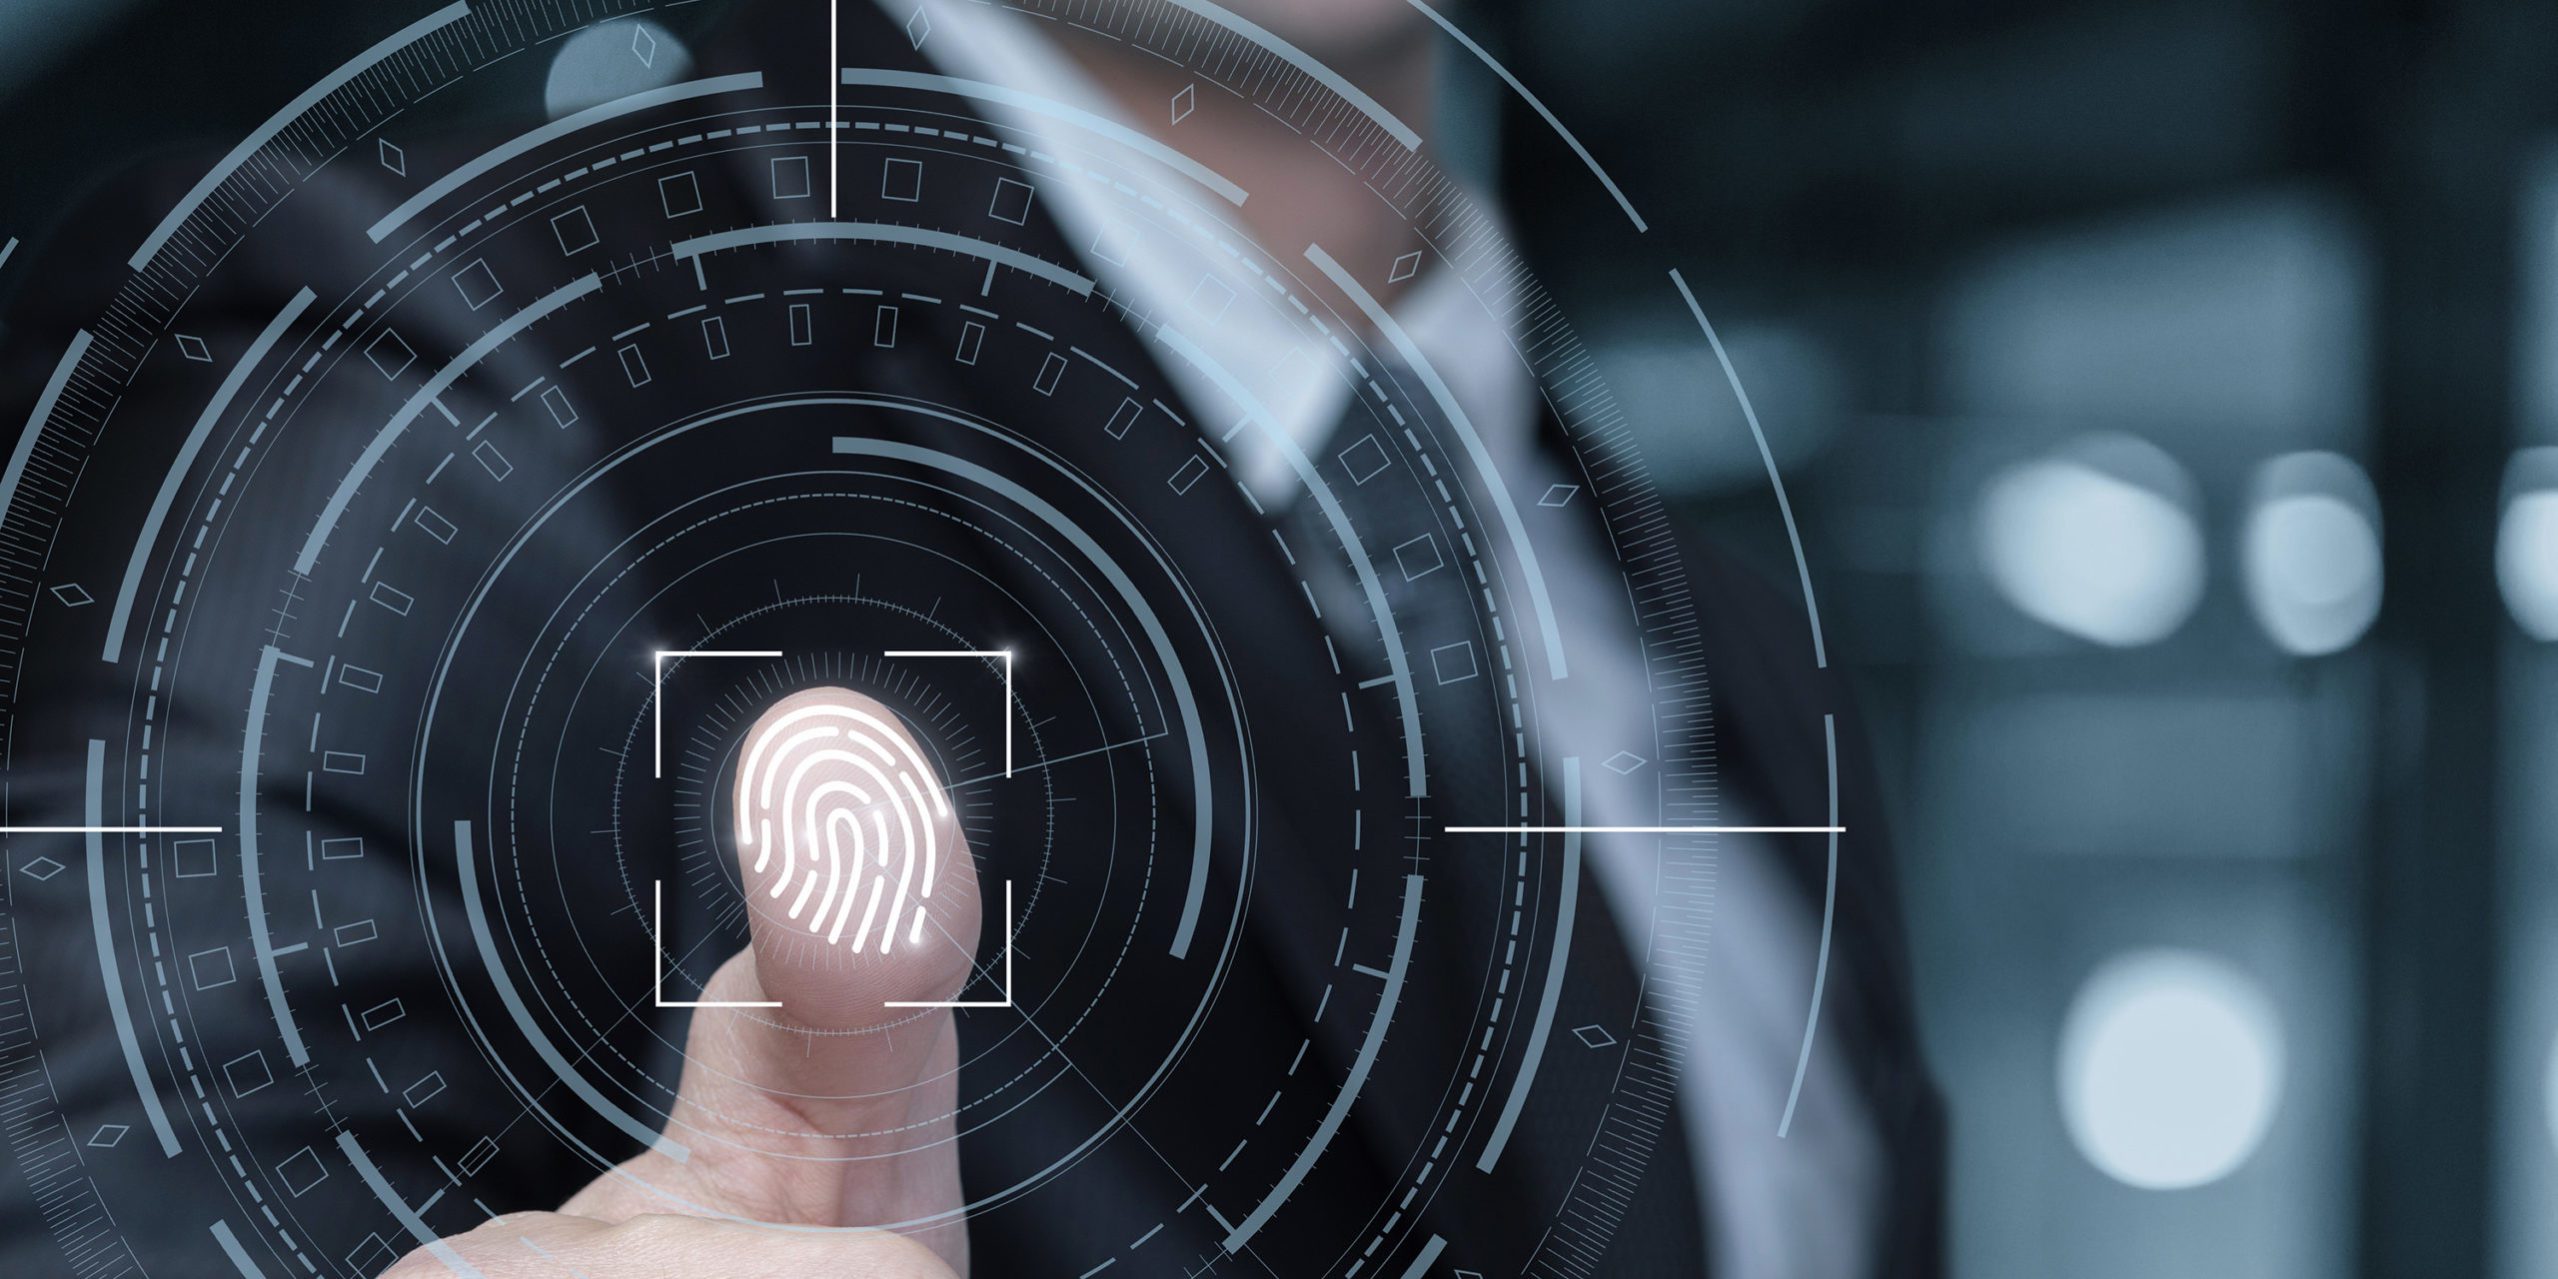 A fingerprint being scanned for security. Illinois' Biometric Information Privacy Act (BIPA) regulates the collection and usage of biometric data by private entities.